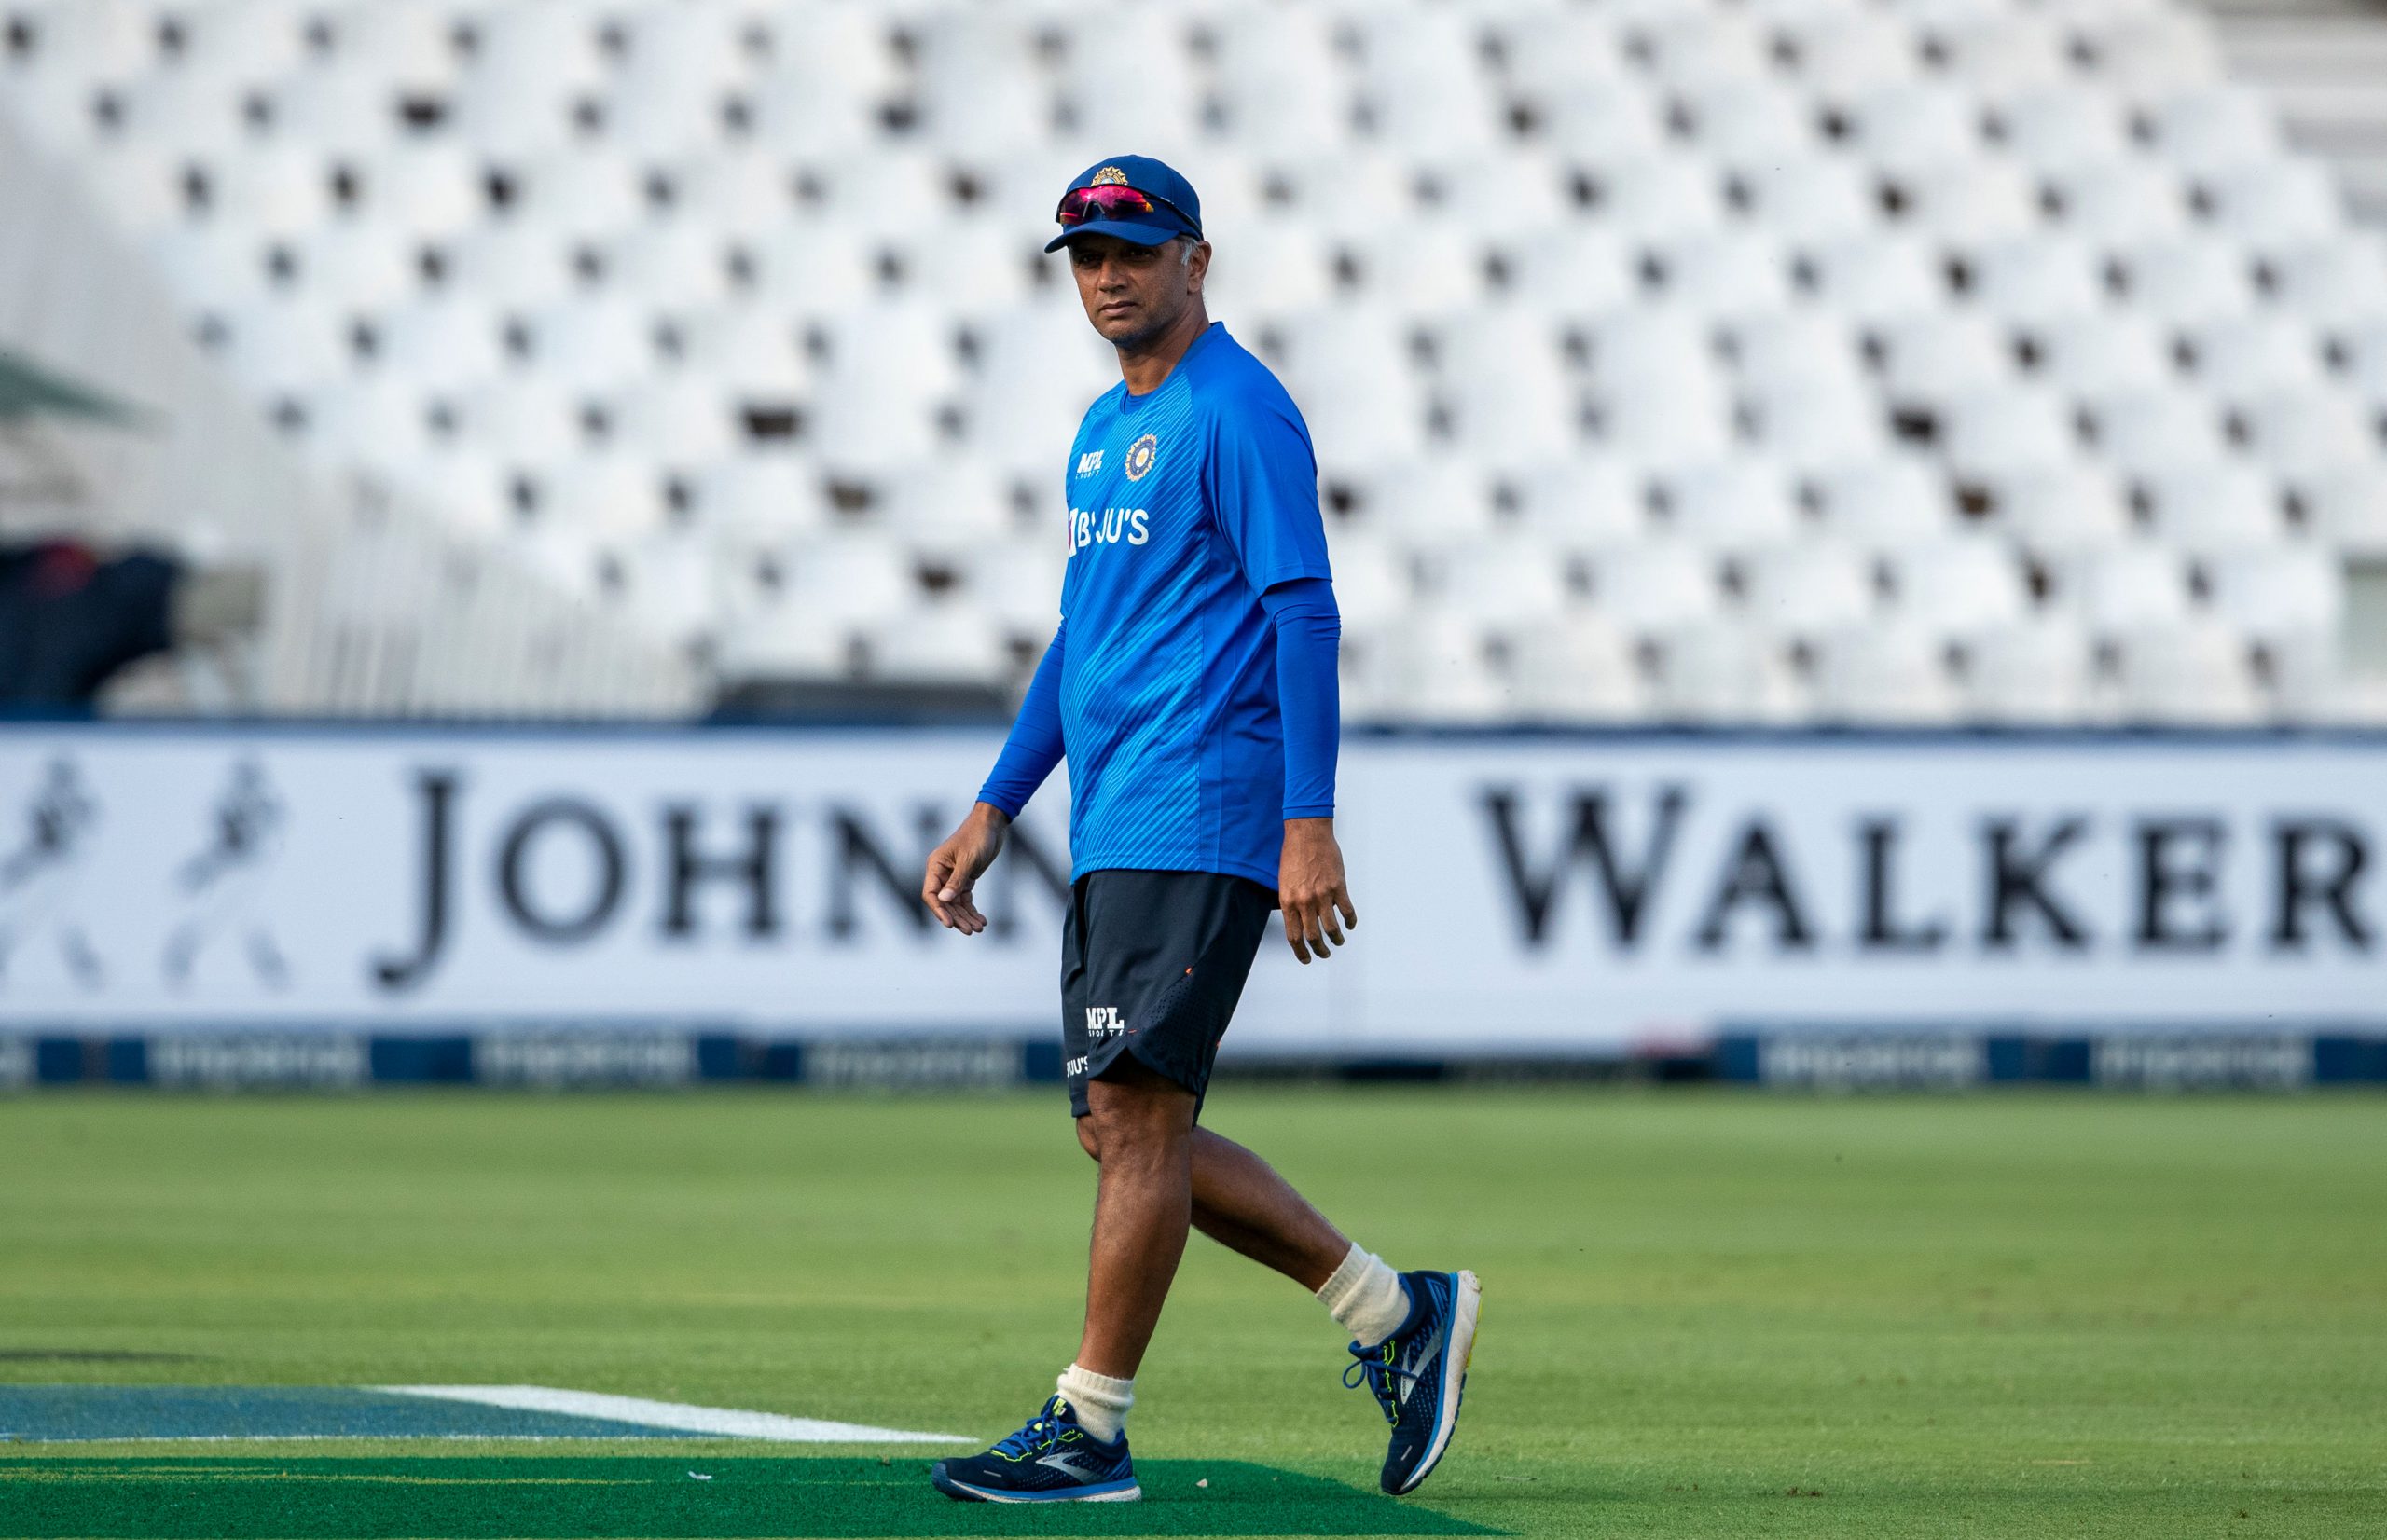 Wishes pour in as The Wall Rahul Dravid turns 49